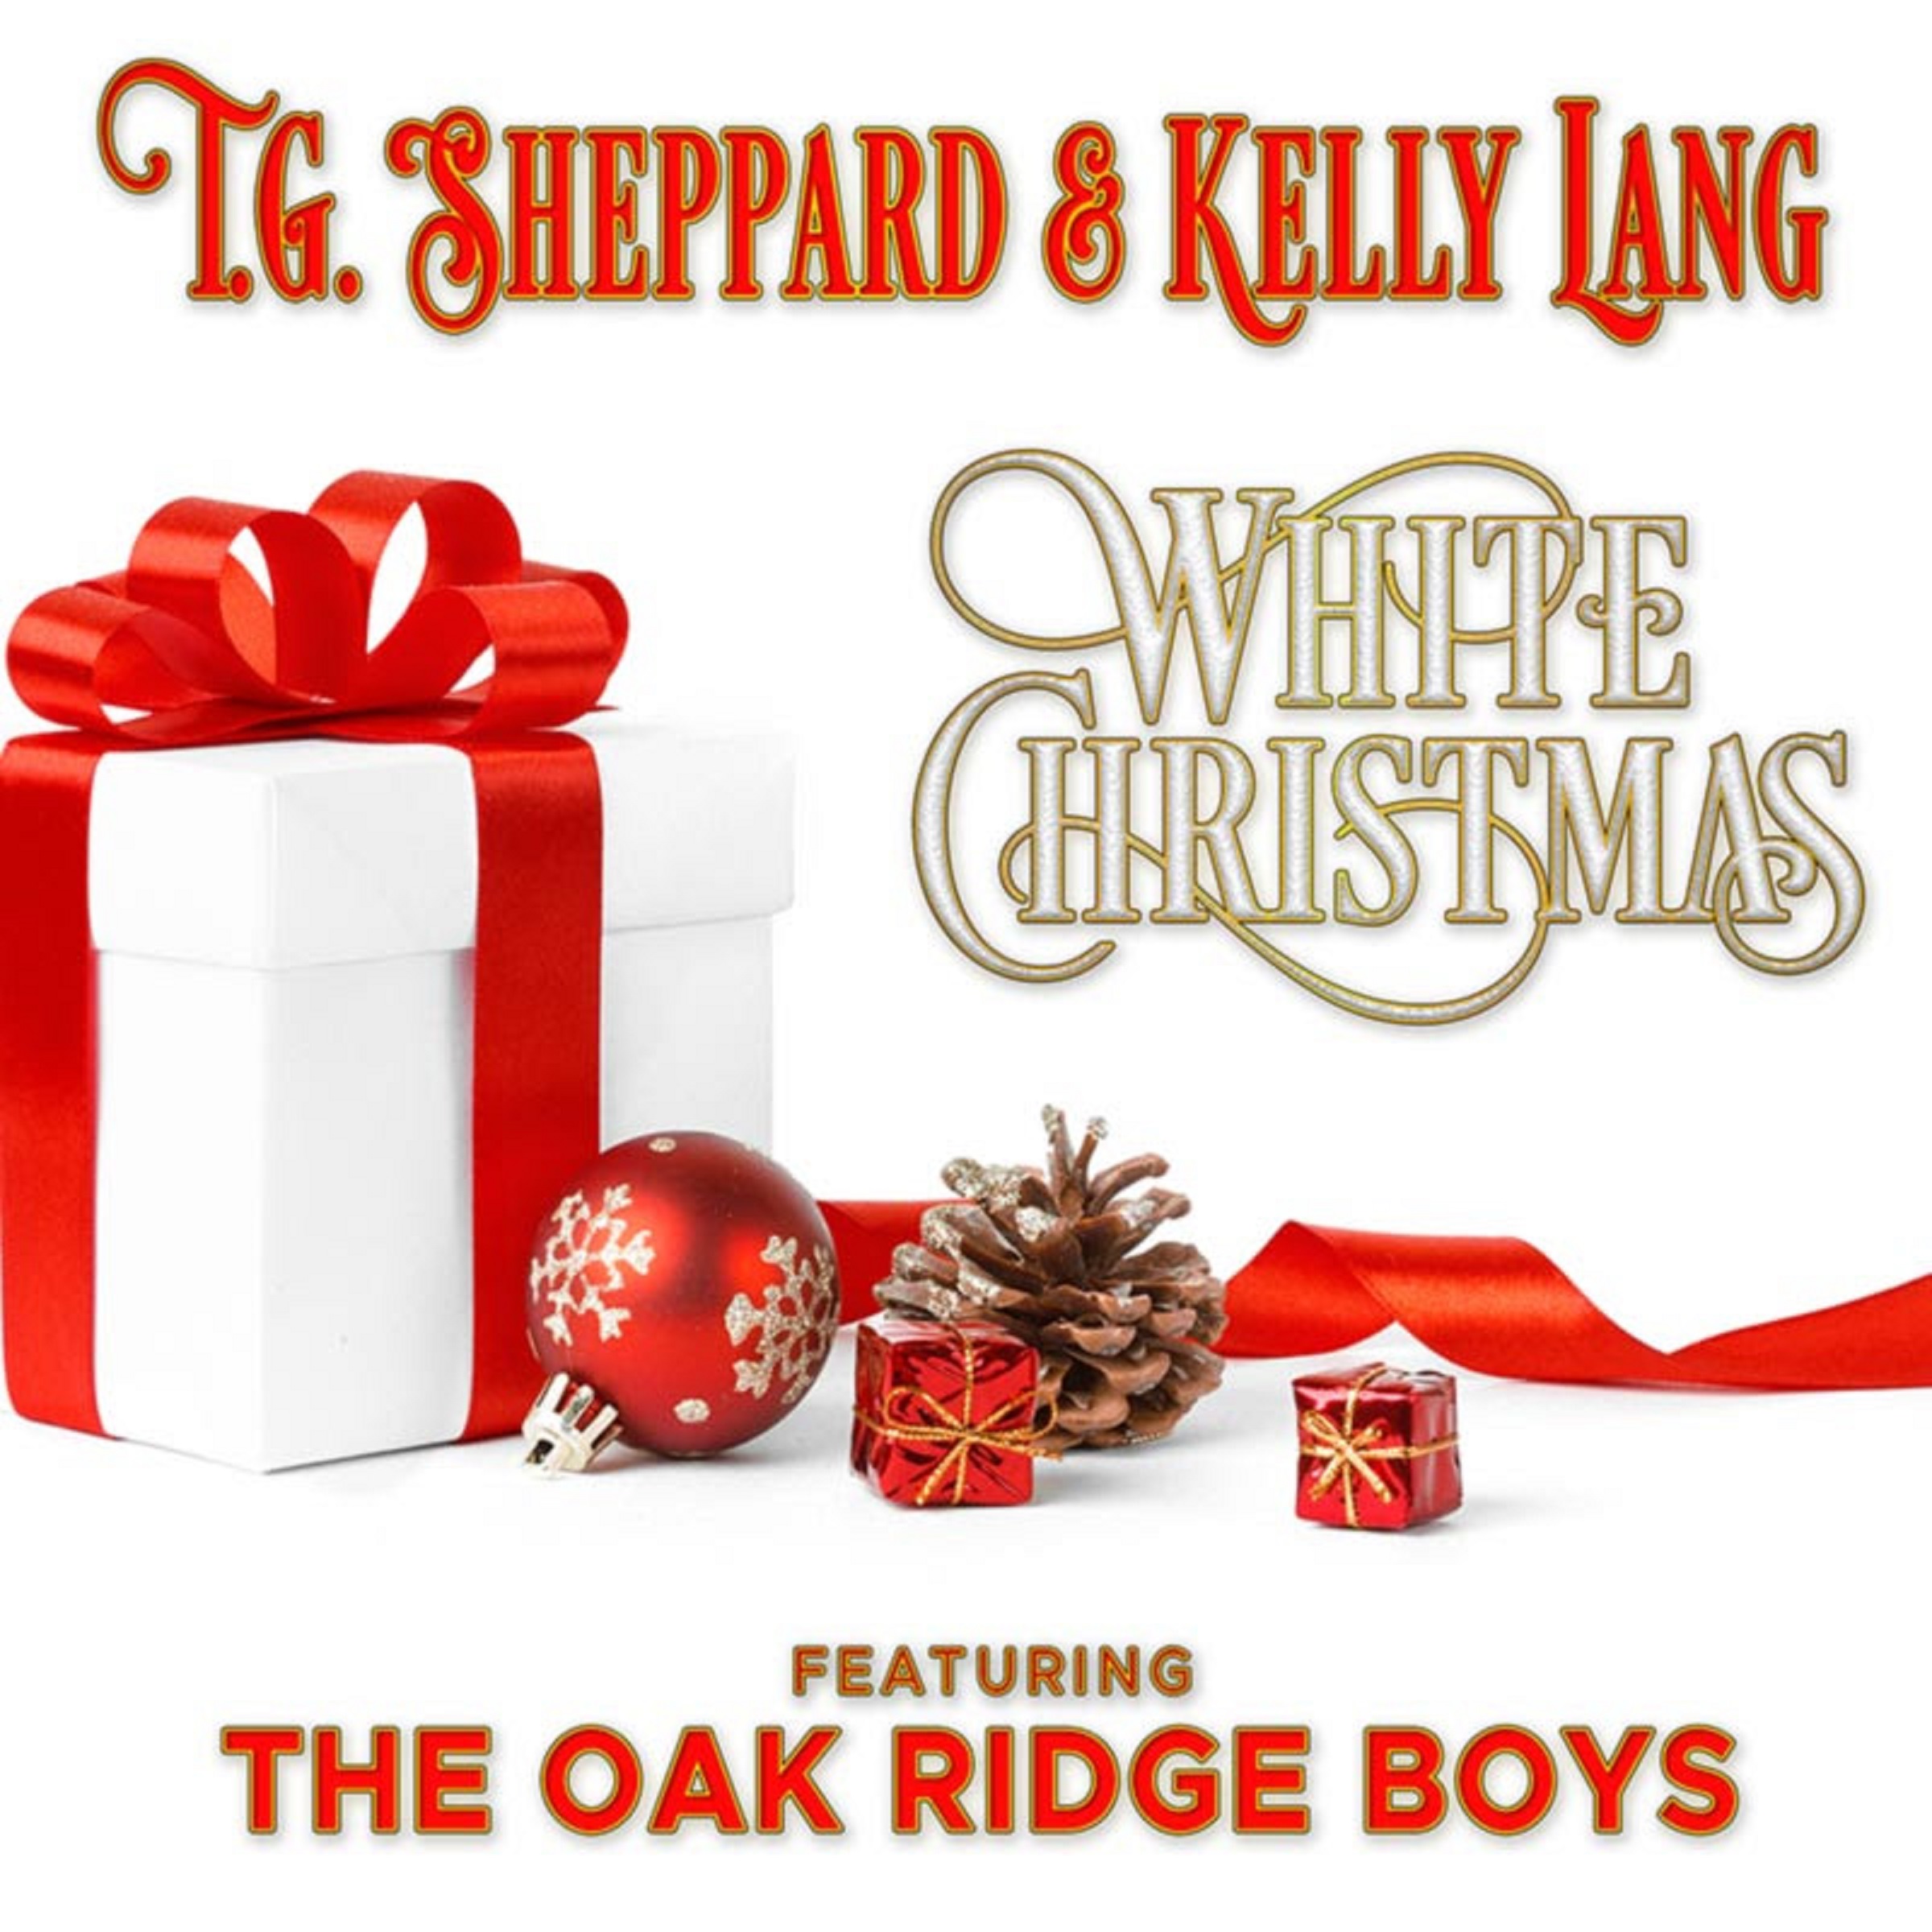 T.G. Sheppard & Kelly Lang Join Forces With The Oak Ridge Boys For "White Christmas"